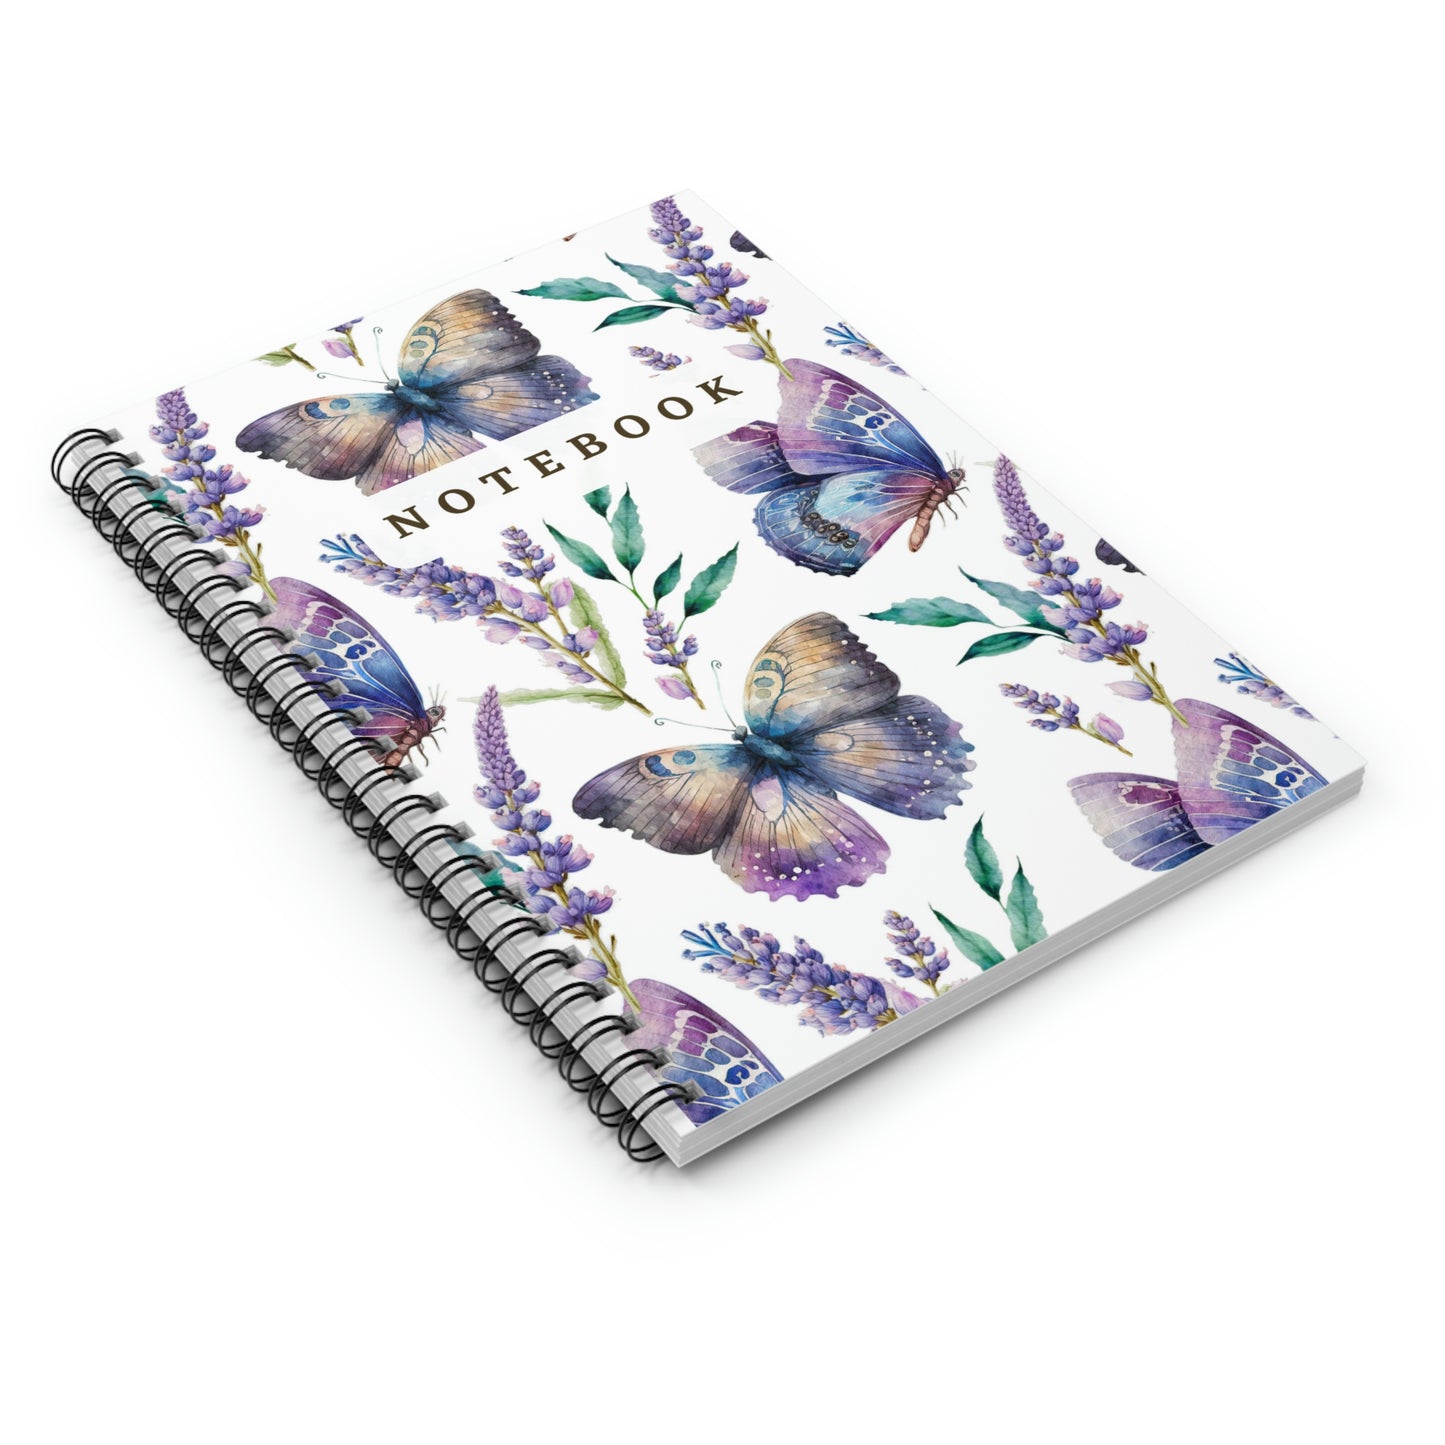 Butterfly & Lavender design Spiral Notebook - Ruled Line 118 pages